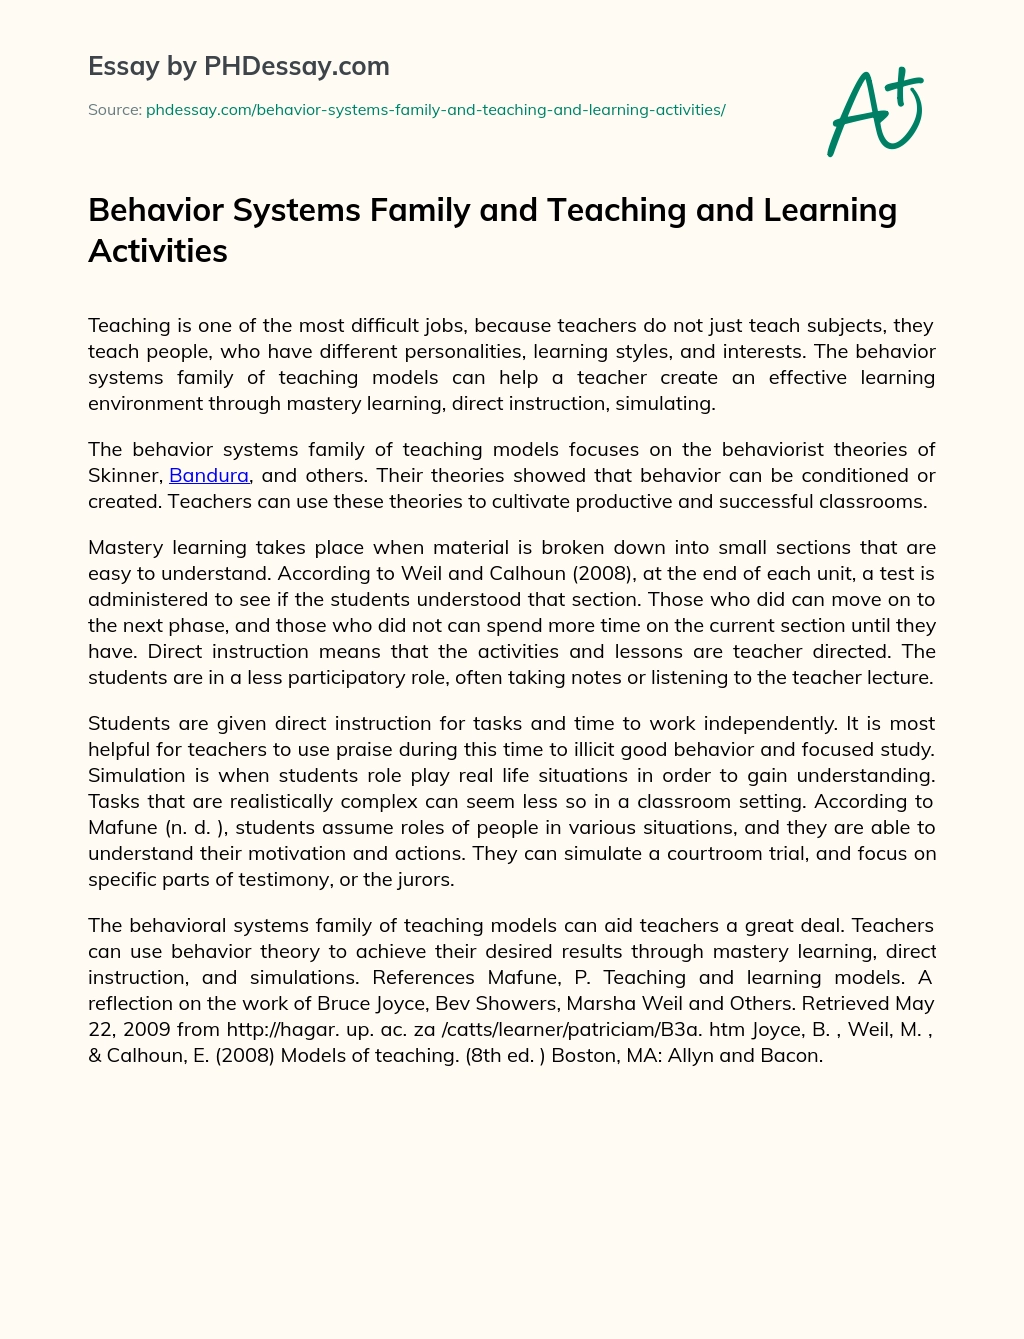 Behavior Systems Family and Teaching and Learning Activities essay